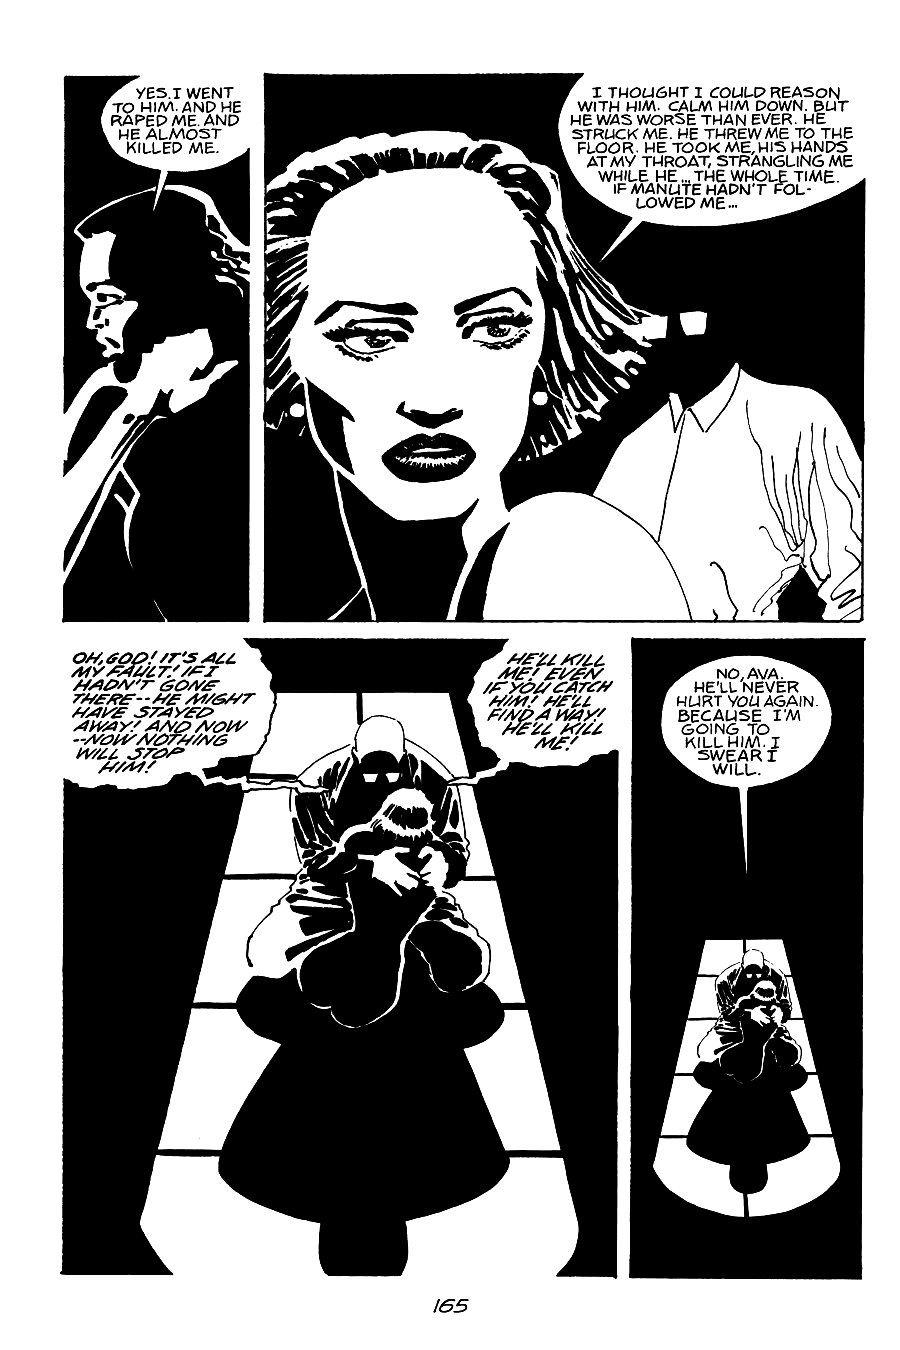 page 165 of sin city 2 the hard goodbye